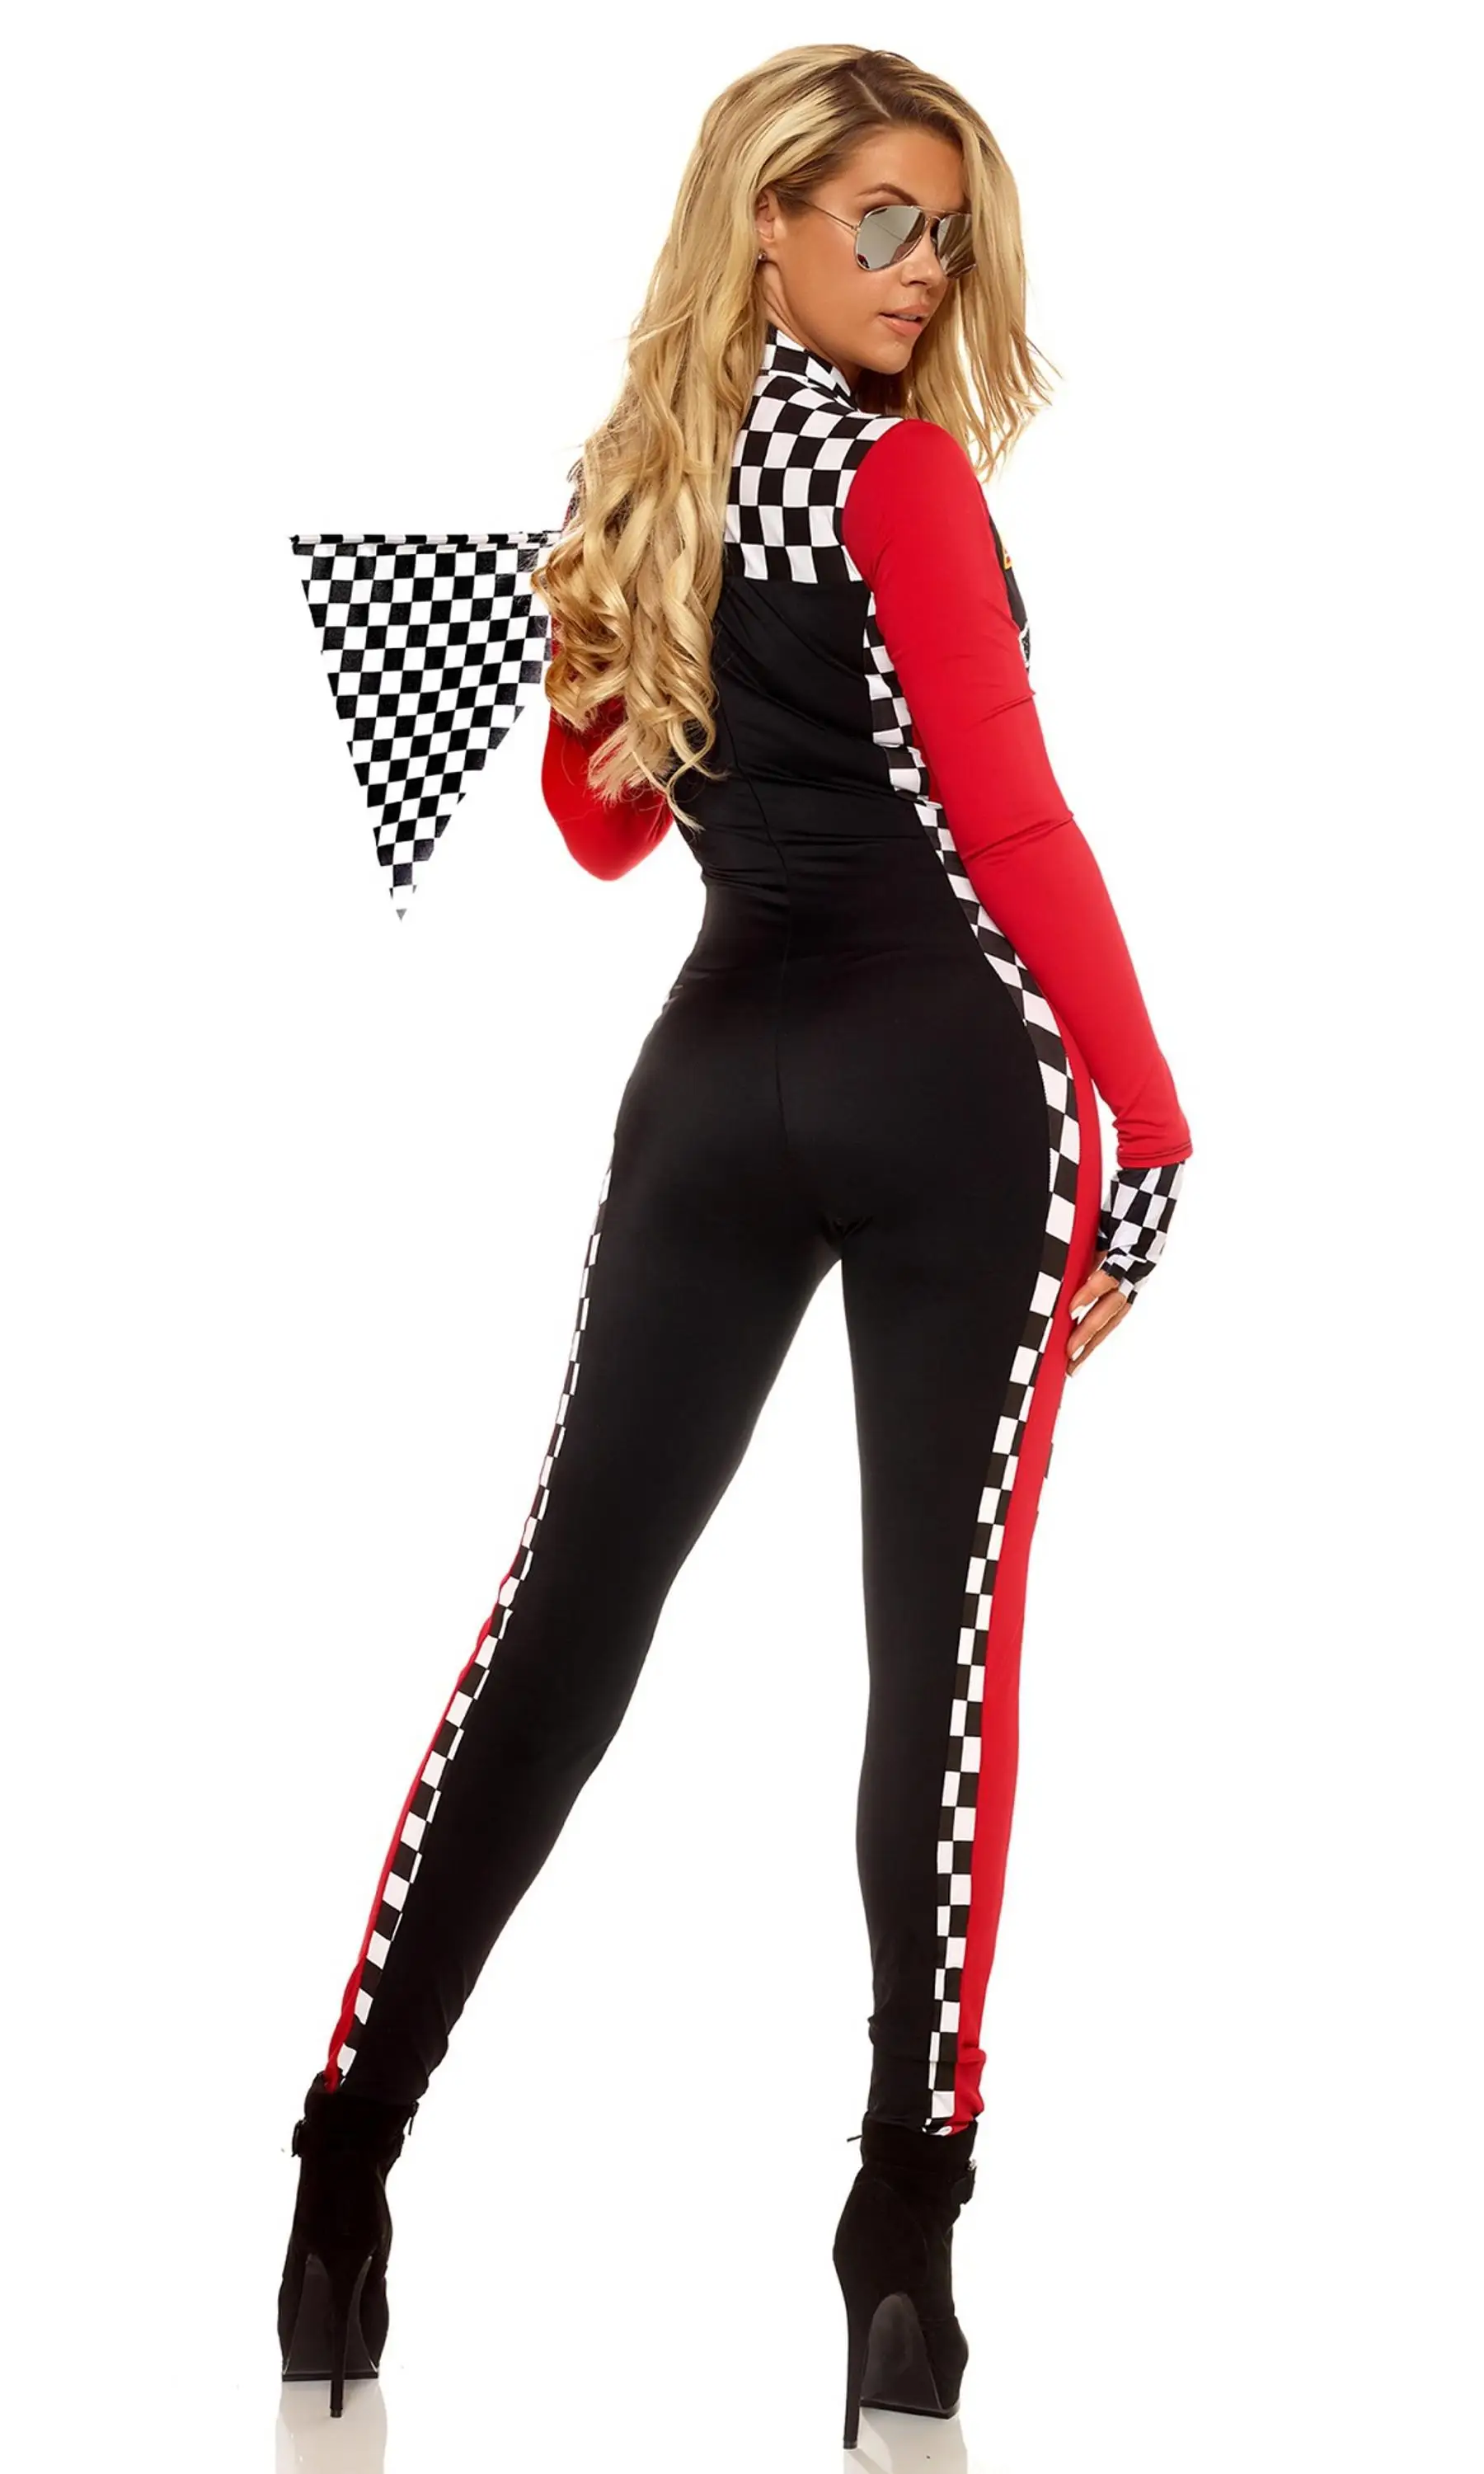 Racing Girl Costume Race Car Plaid Jumpsuit Costume Women Driver Halloween  Sexy Race Girl Long Sleeves Outfit Fancy Dress - Sexy Costumes - AliExpress